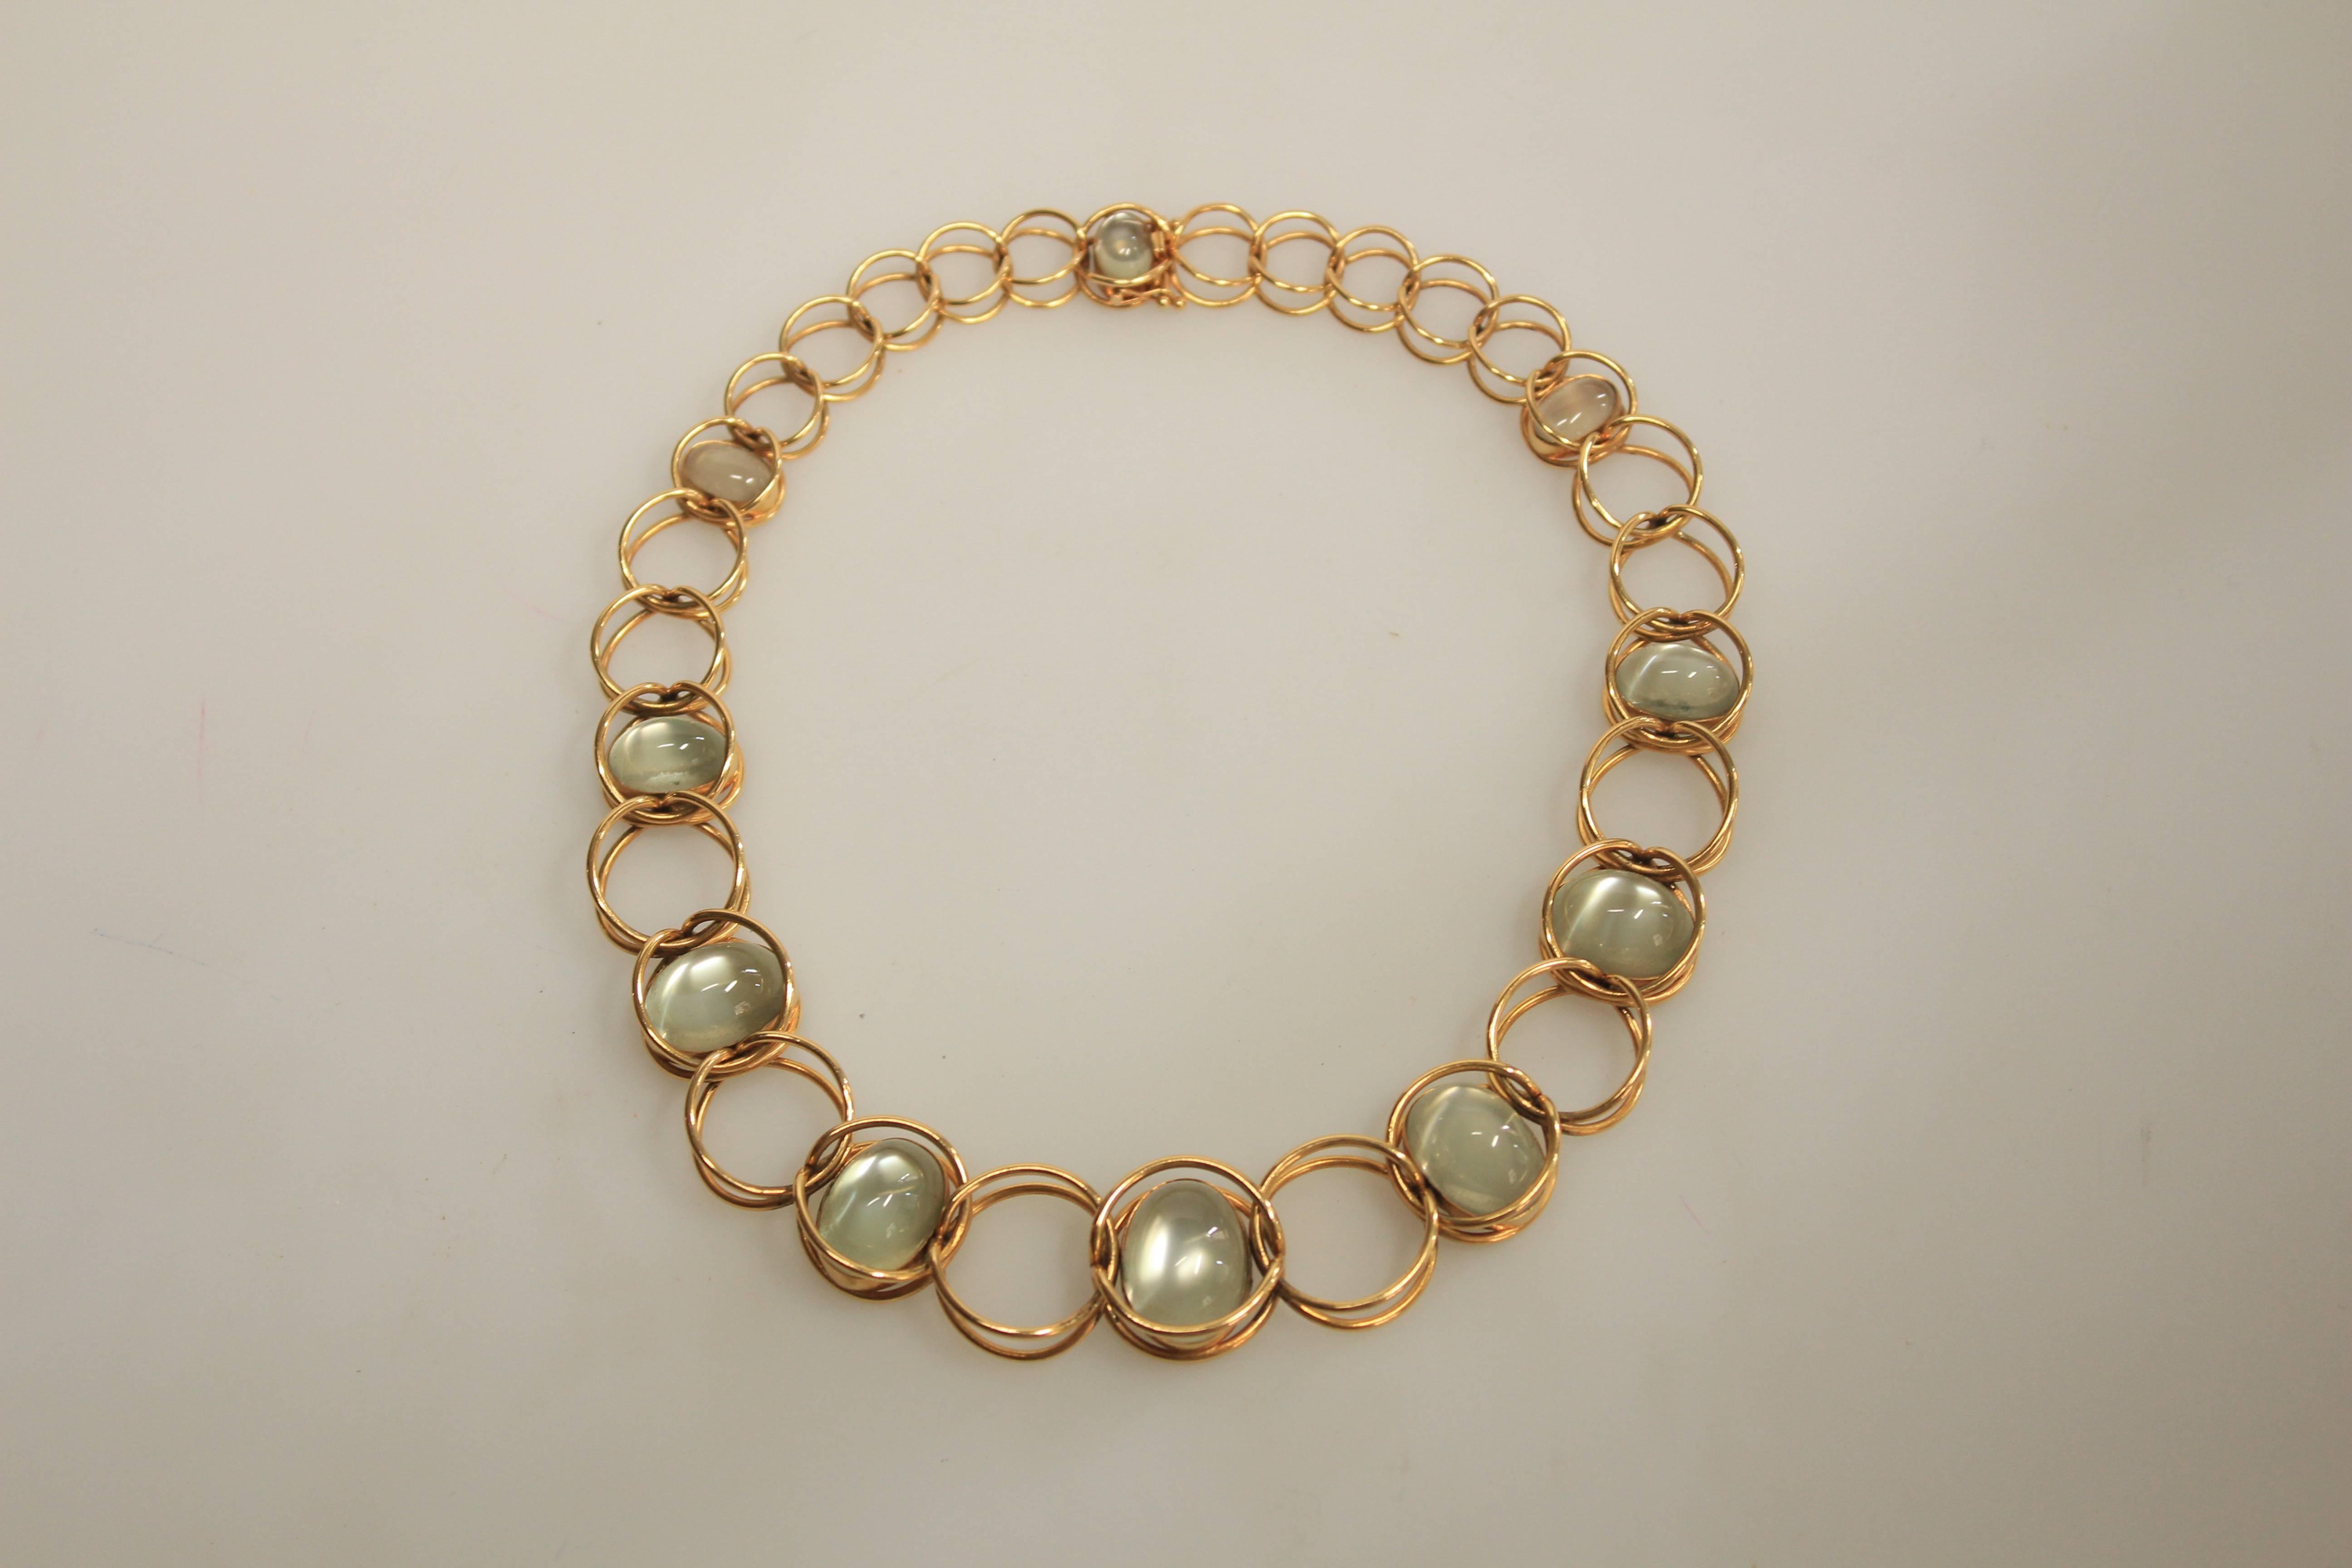 Georg Jensen 18K Gold and Moonstone Necklace & Bracelet Designed by Axel Jensen In Excellent Condition For Sale In Brussels, BE